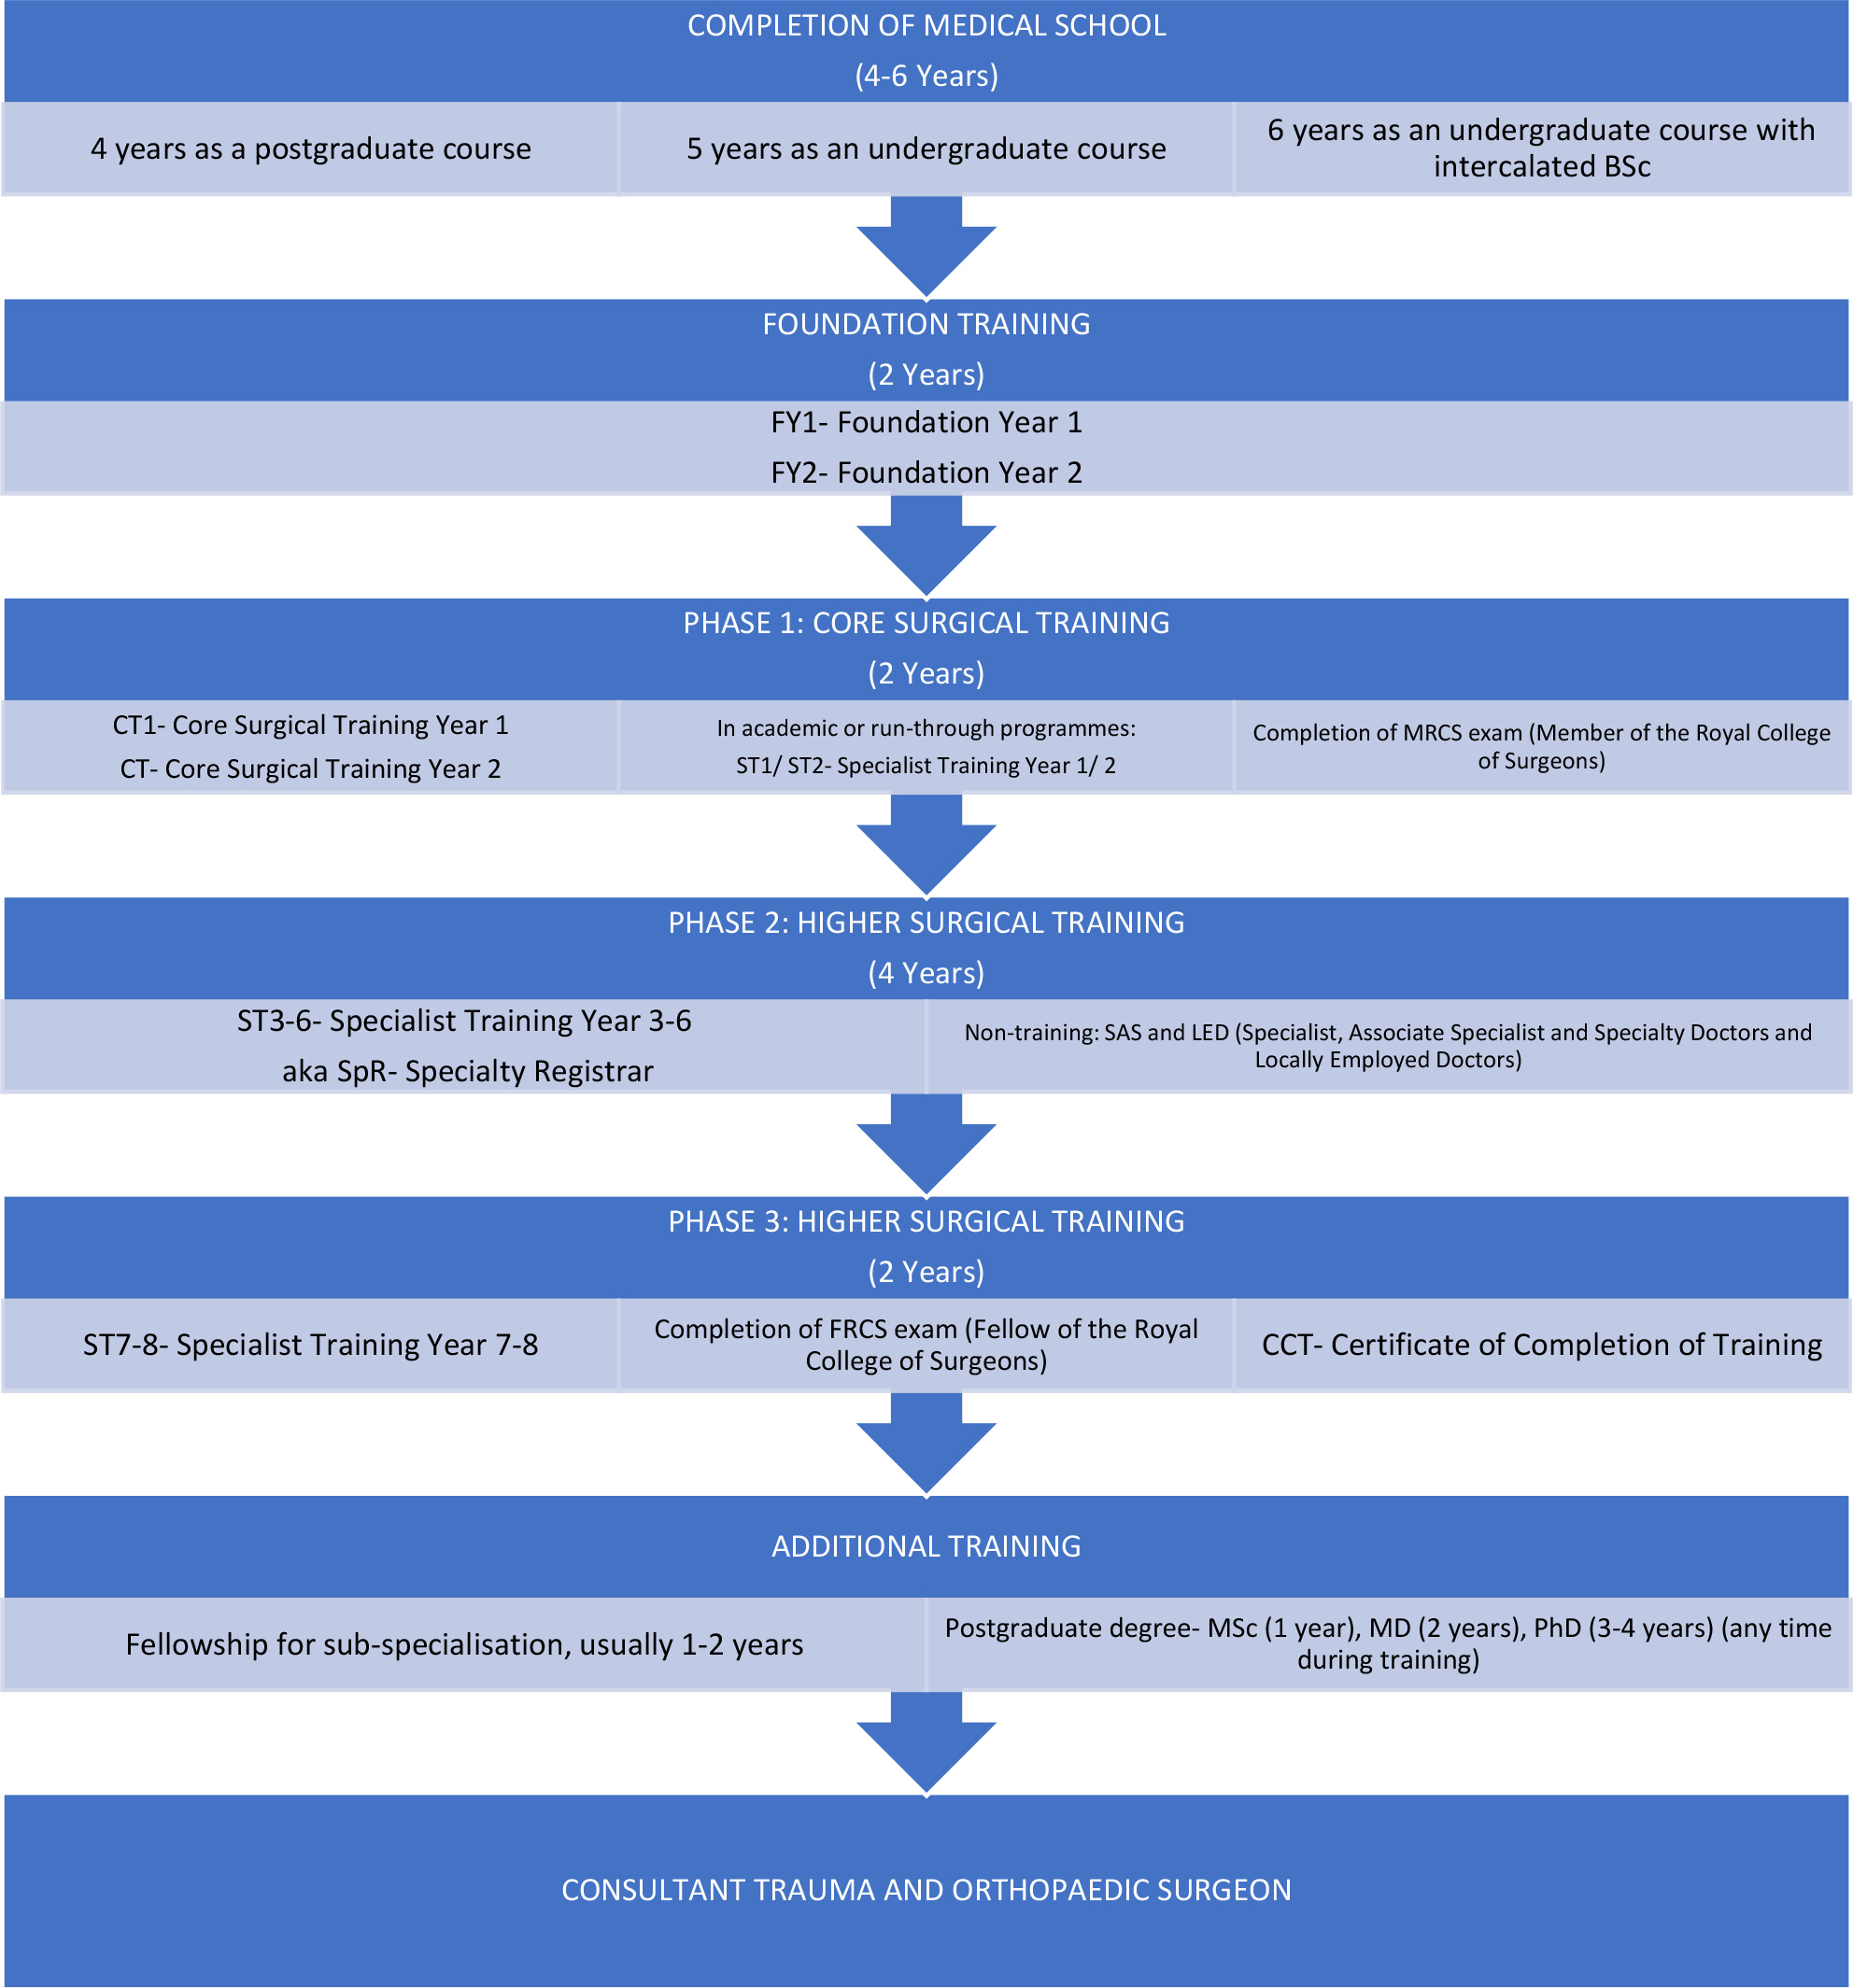 Fig. 1 
          Overview of typical training pathway from medical school graduation and grades of surgeons in trauma and orthopaedics in the UK. This includes two years of foundation training, two years of core surgical training, and six years of higher speciality training (FRCS exam typically taken during ST7 and ST8), although out of programme (OOP) years are not depicted in this figure.
        